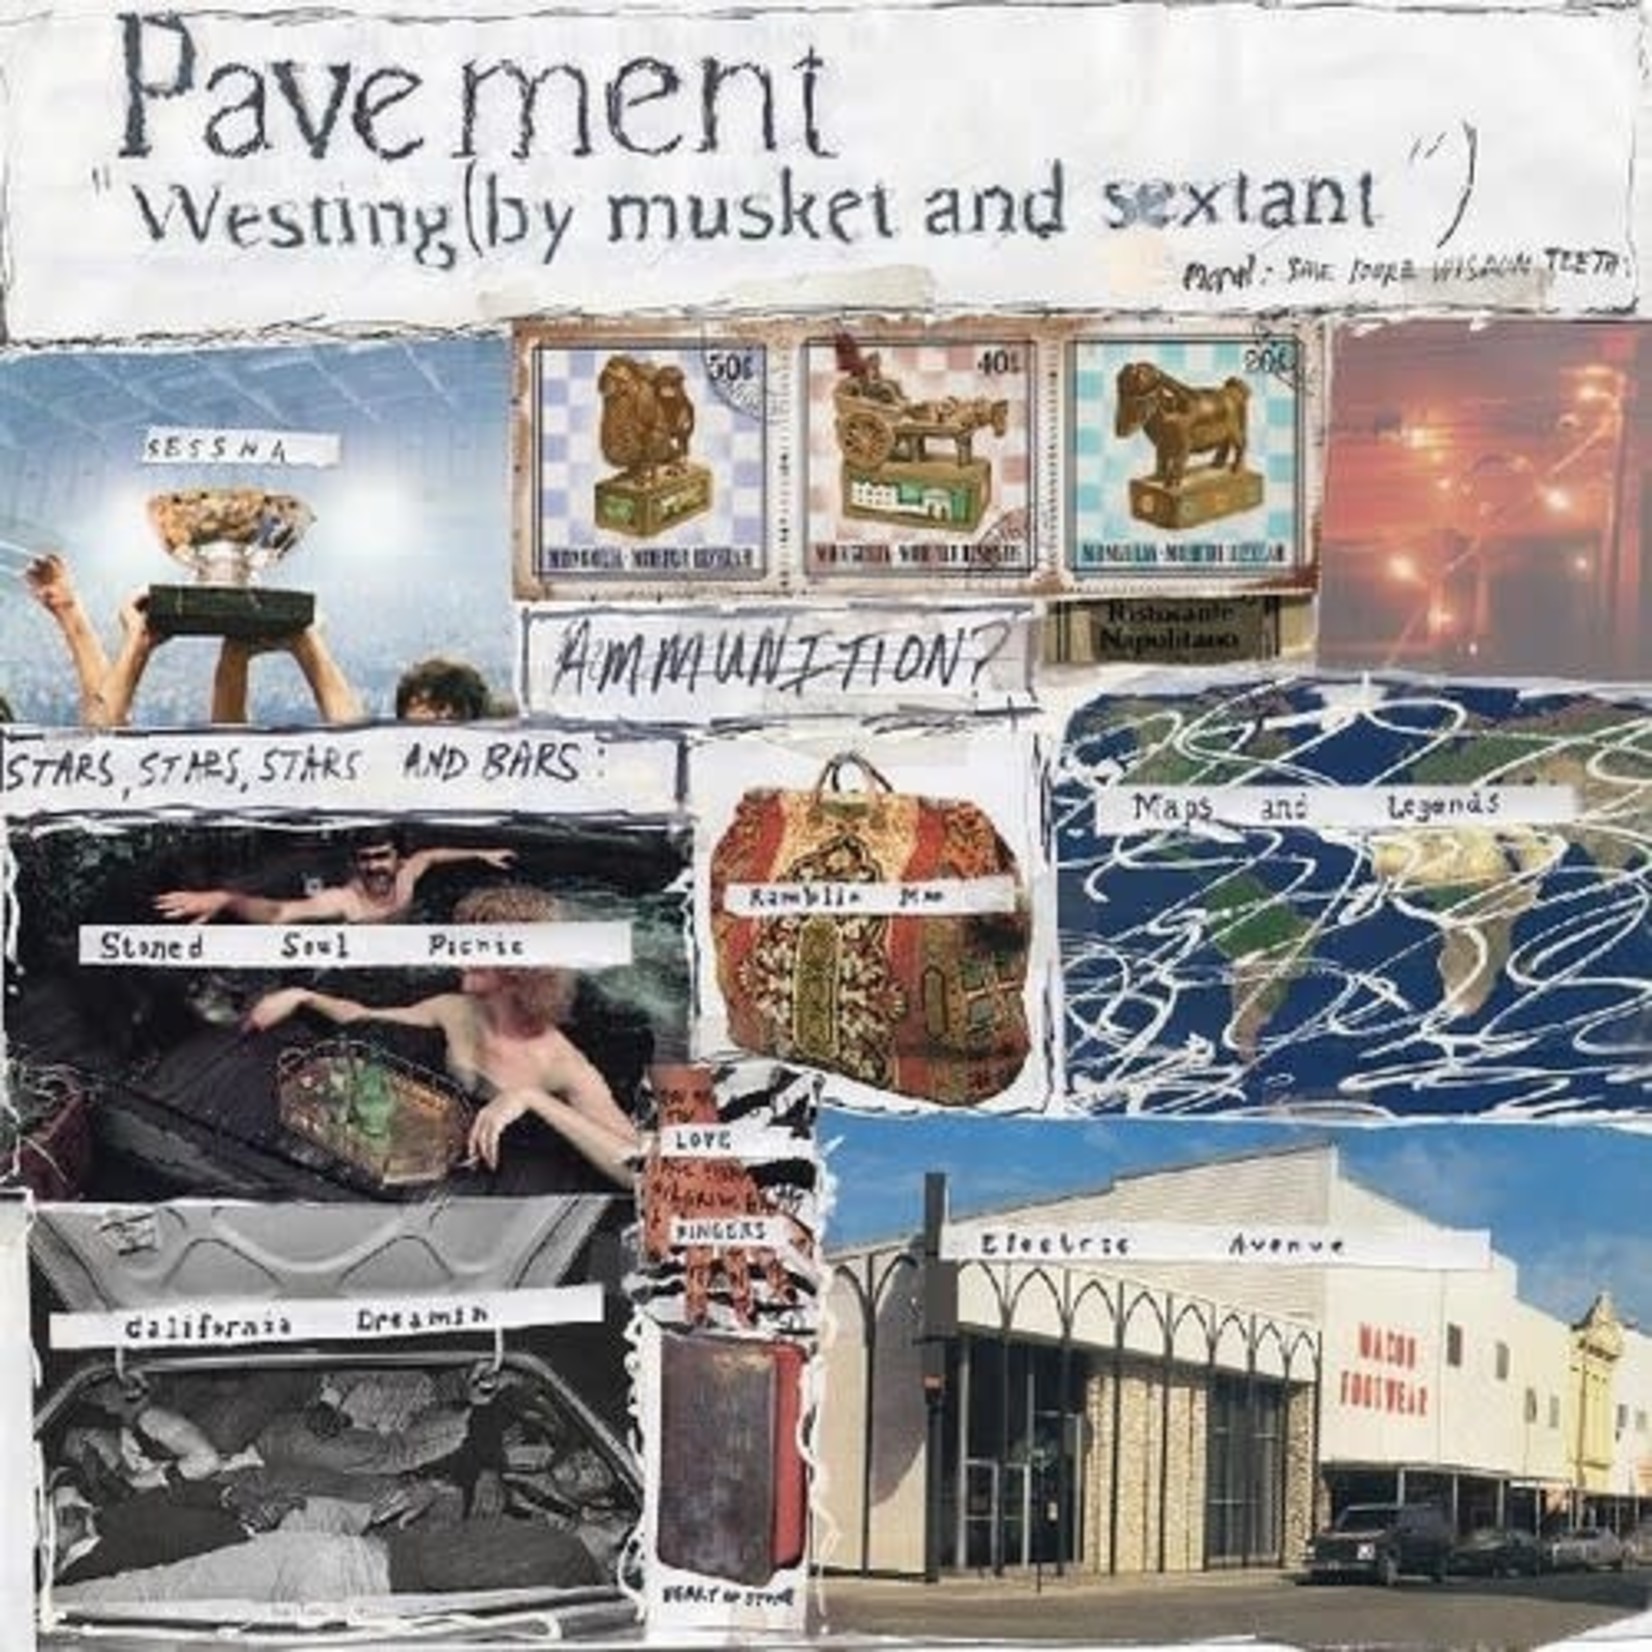 Pavement - Westing (By Musket And Sextant) [CD]